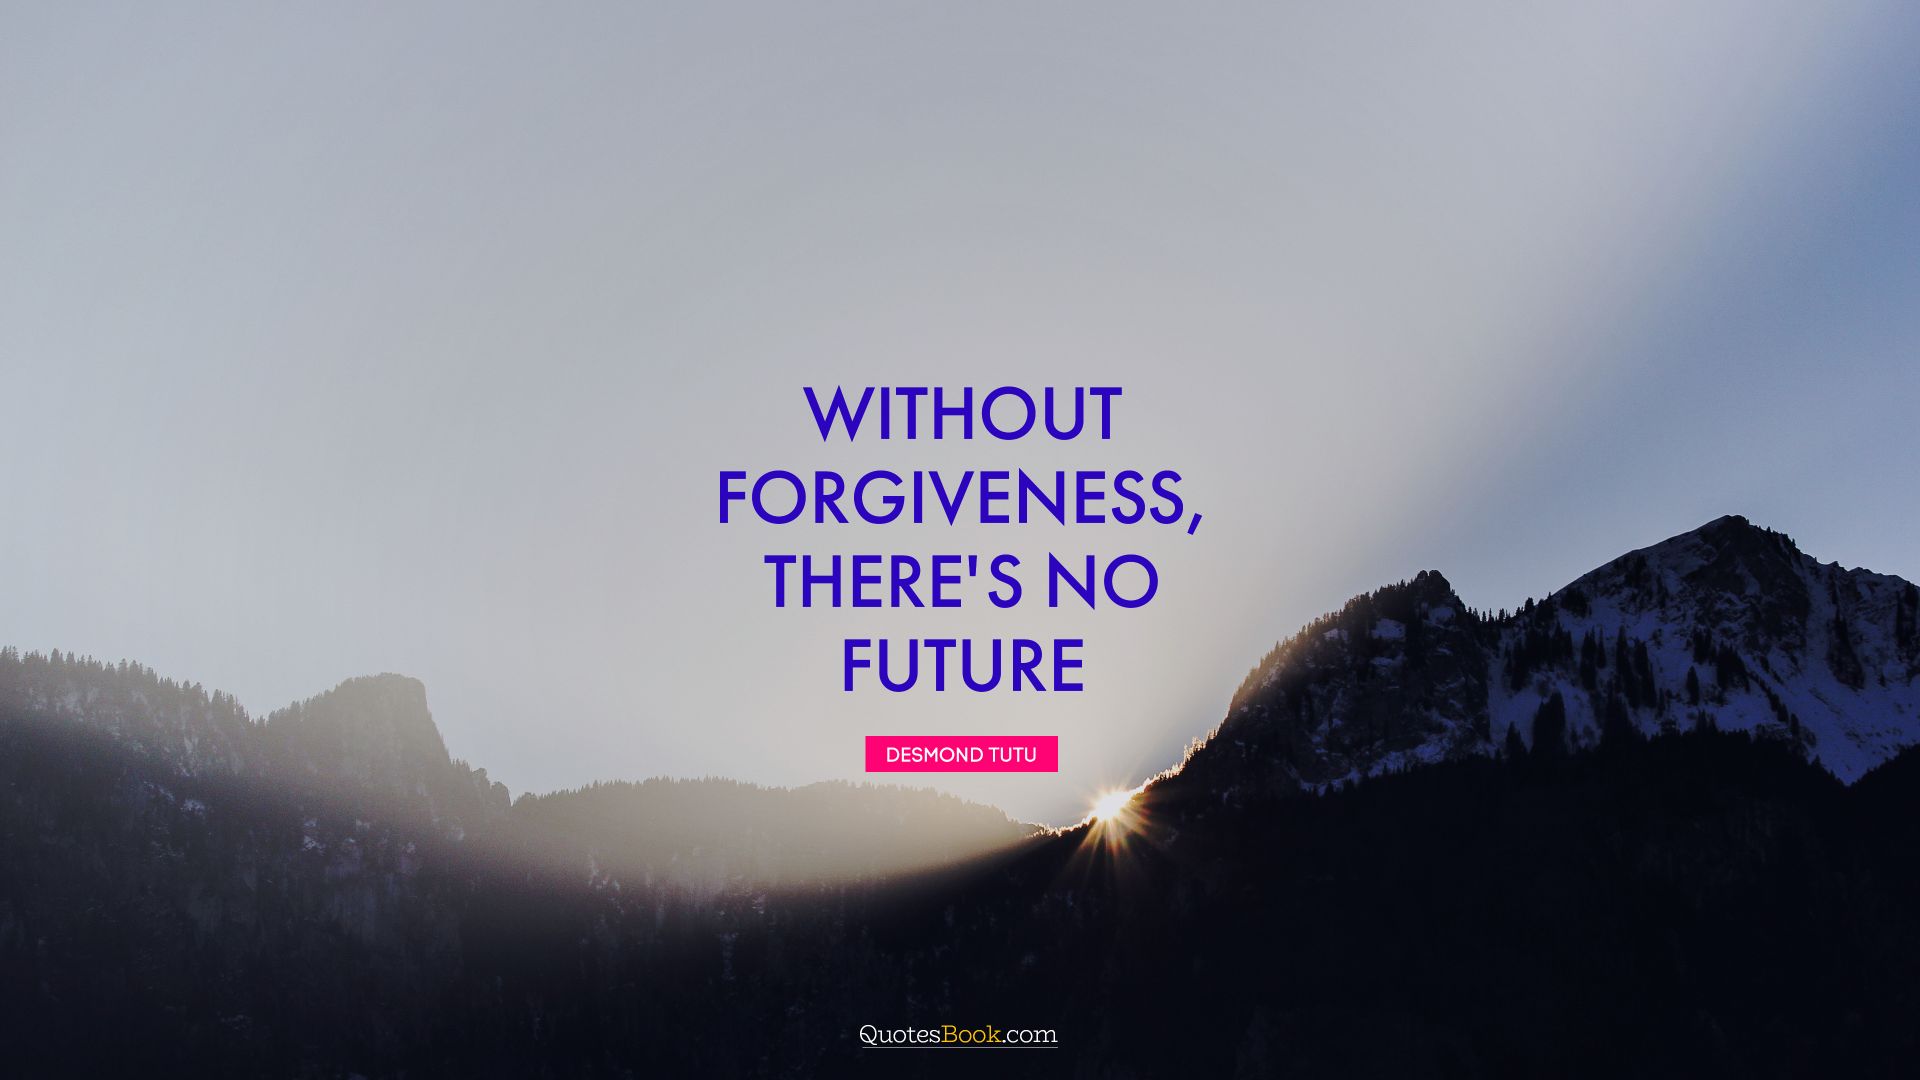 Without forgiveness, there's no future. - Quote by Desmond Tutu